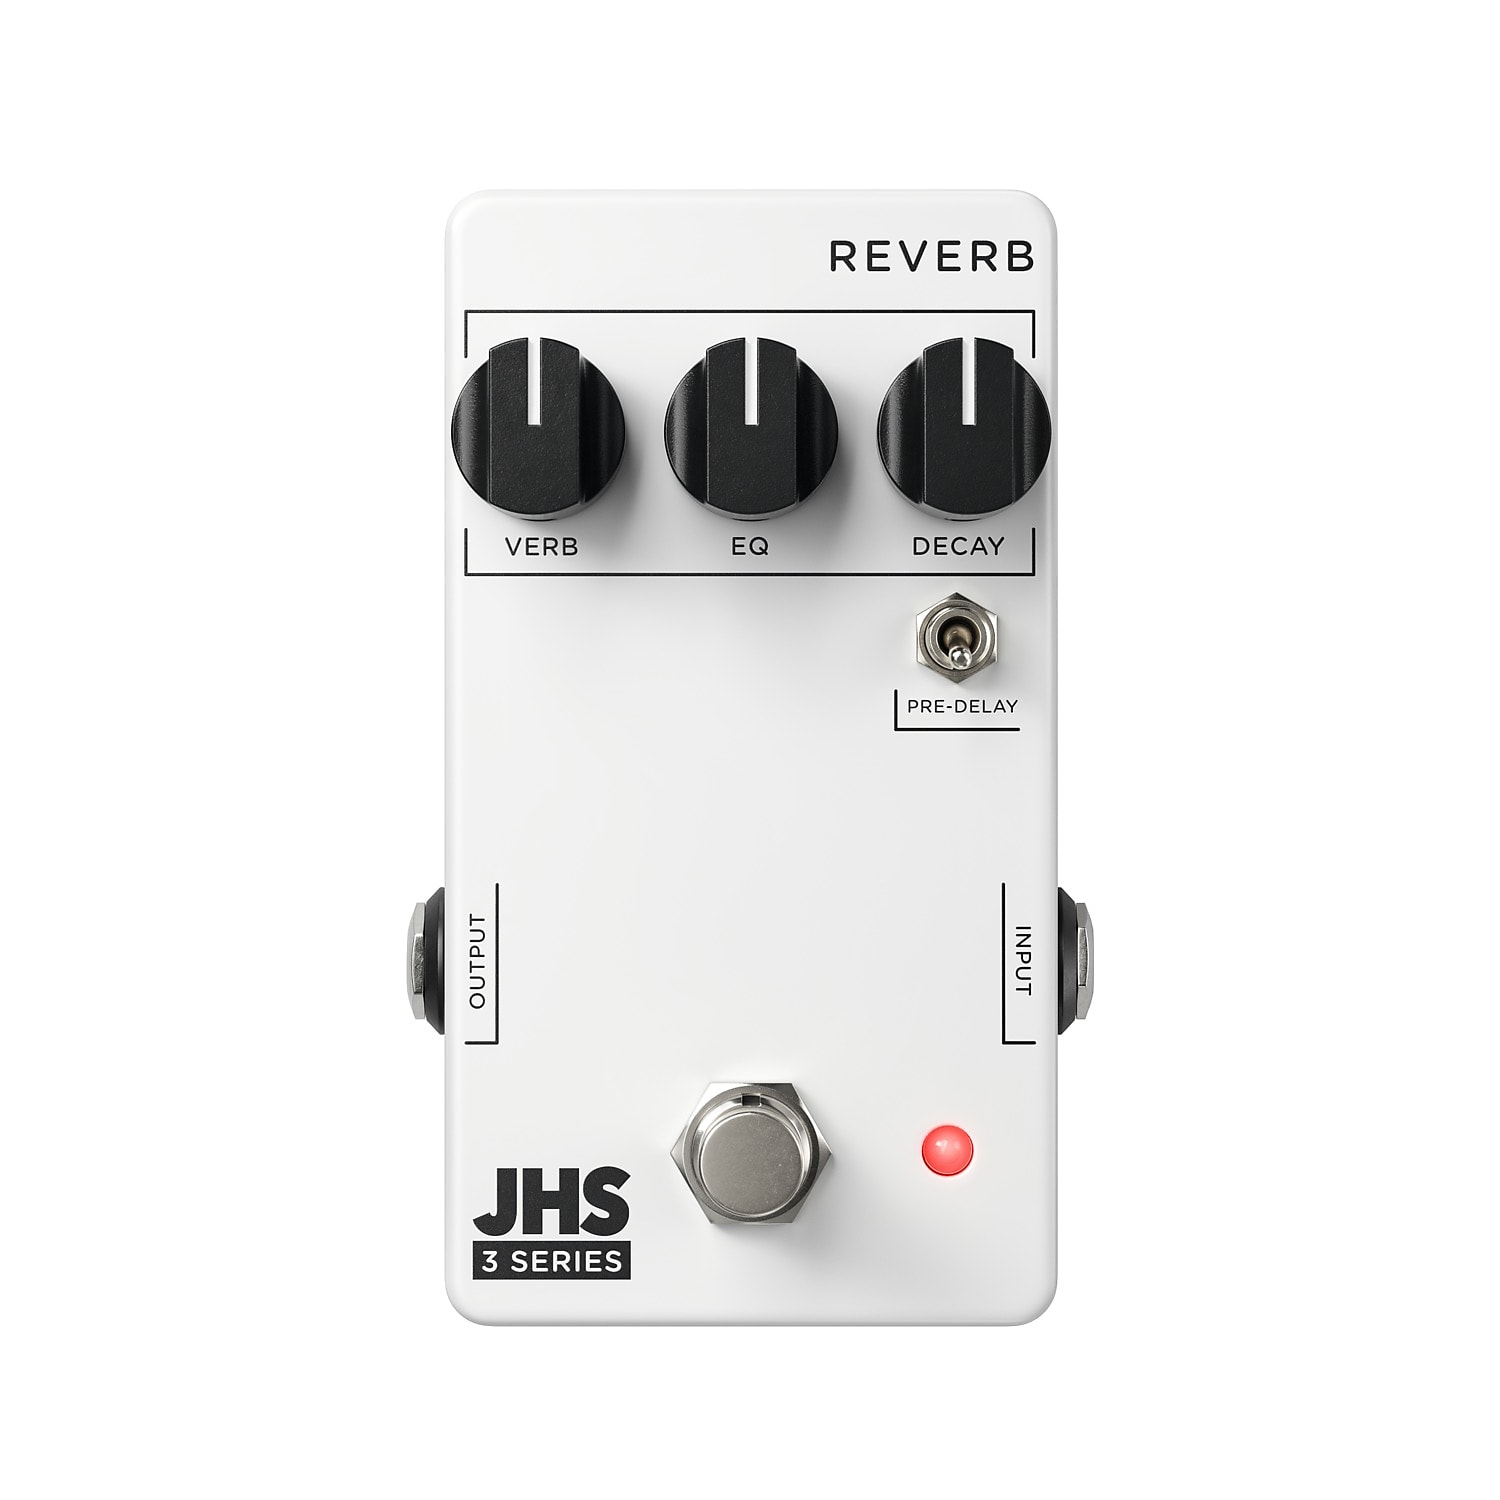 JHS 3 Series Reverb Effects Pedal